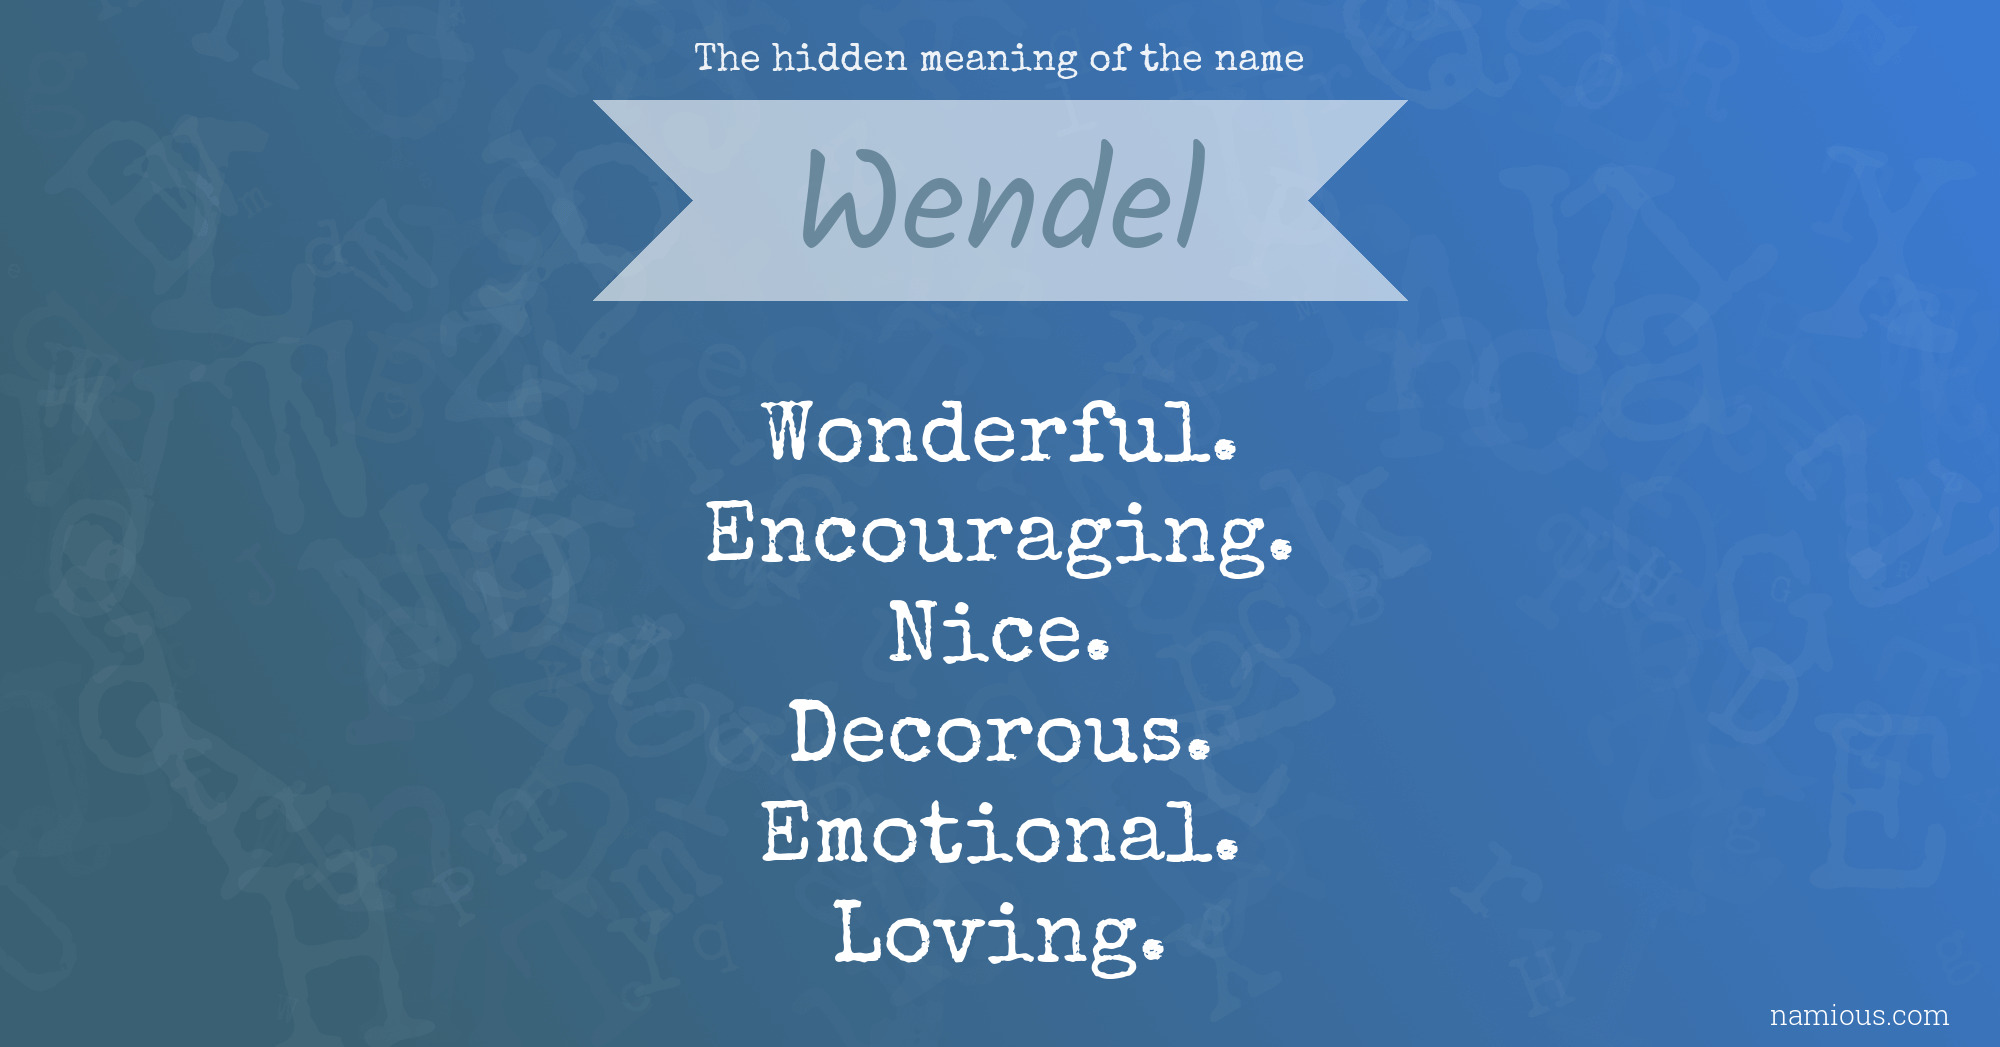 The hidden meaning of the name Wendel